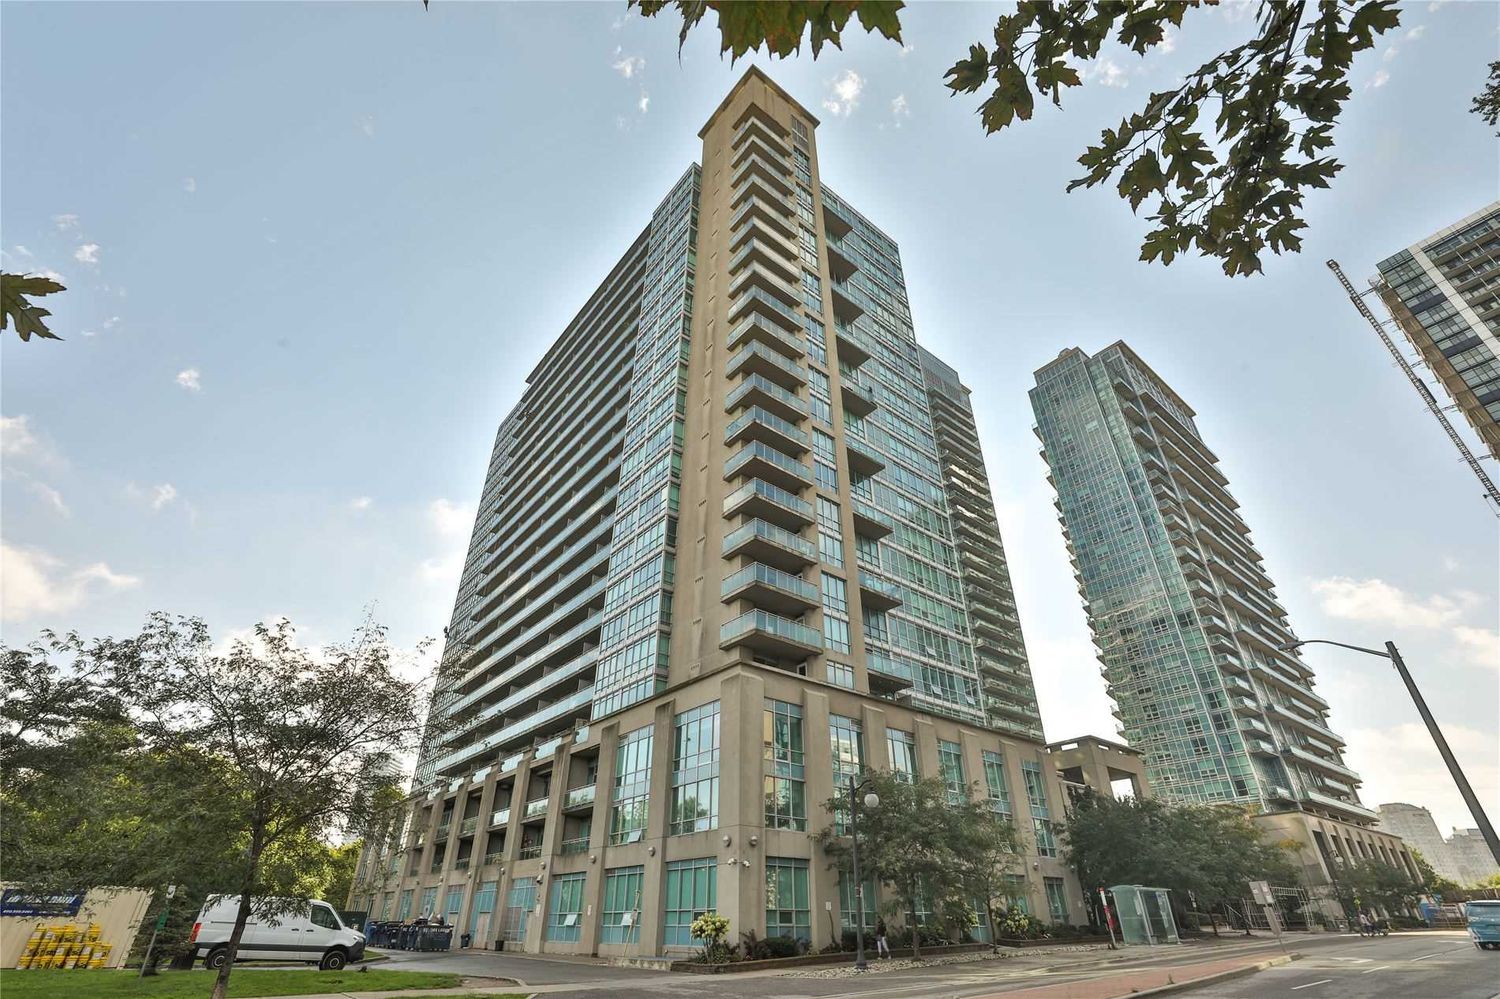 185 Legion Road N. The Tides at Mystic Pointe Condos is located in  Etobicoke, Toronto - image #2 of 2